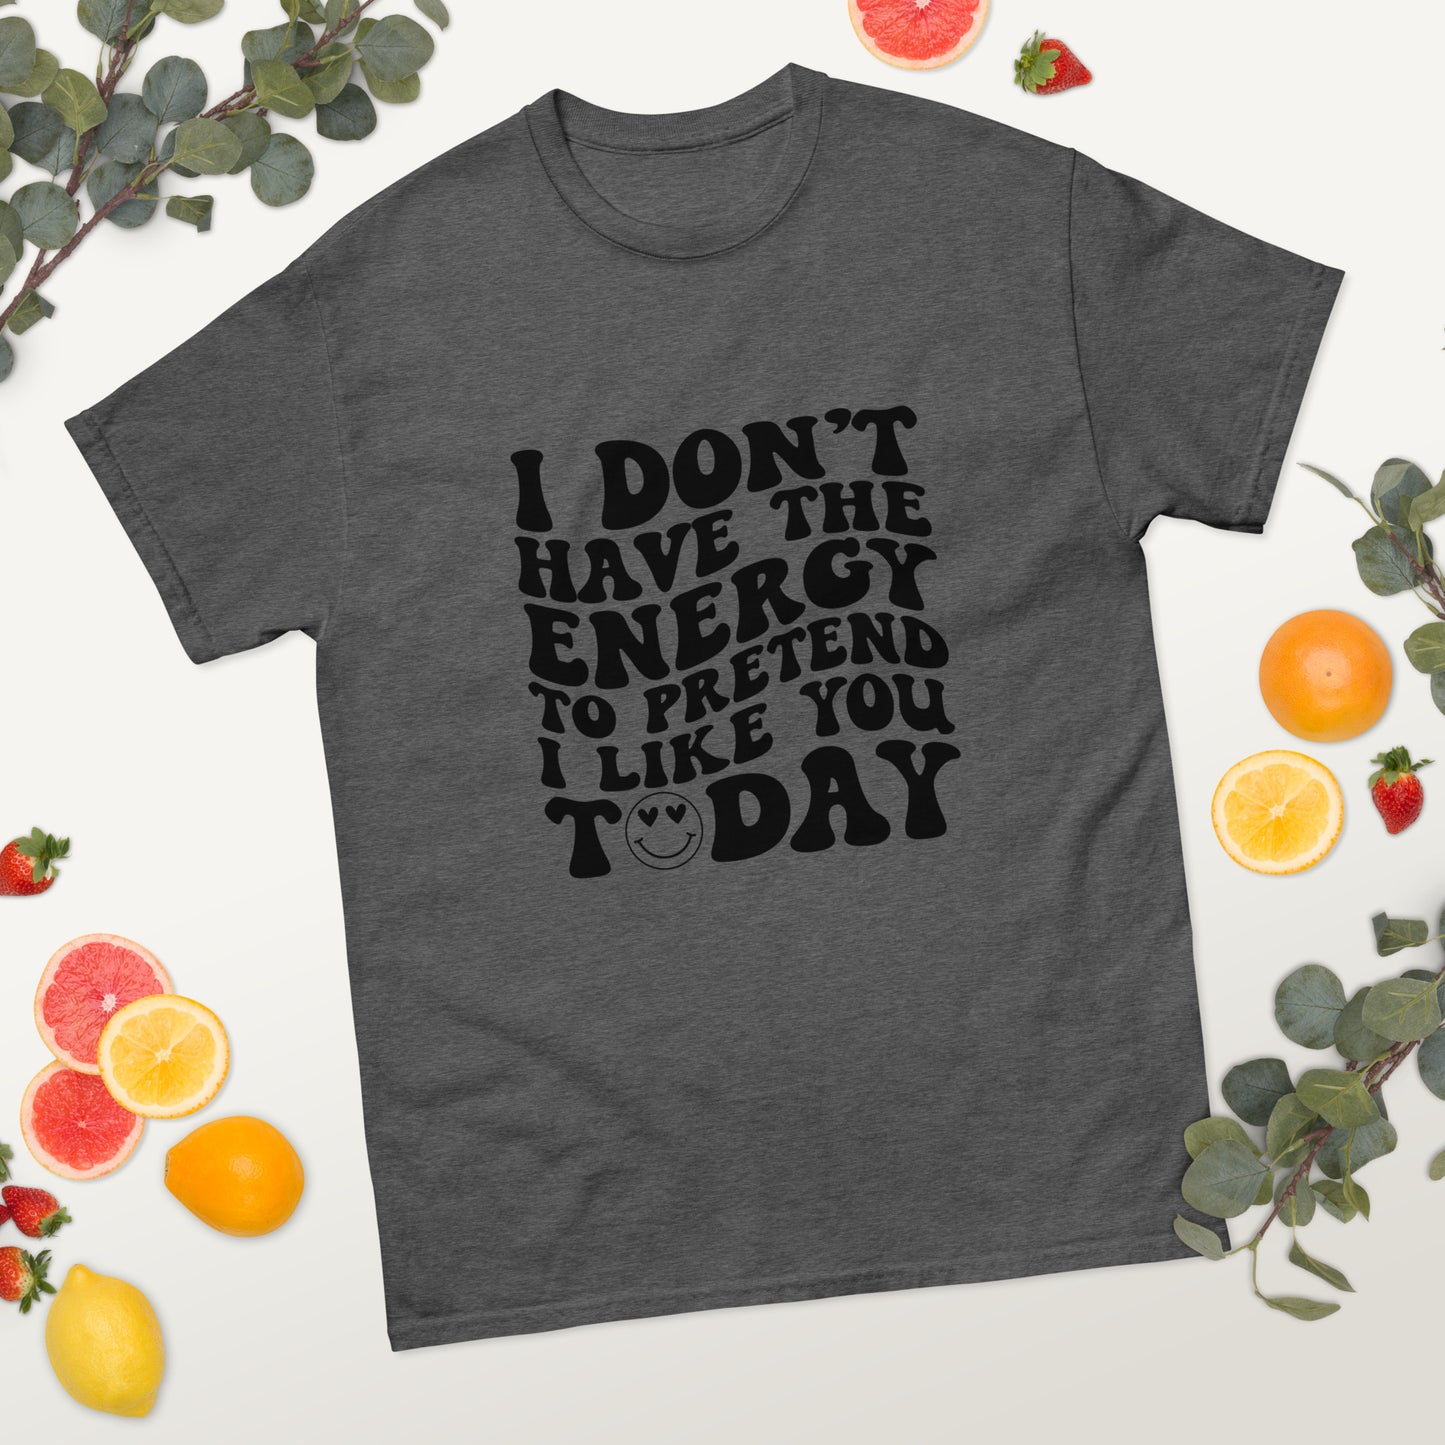 I don't have the energy classic t-shirt